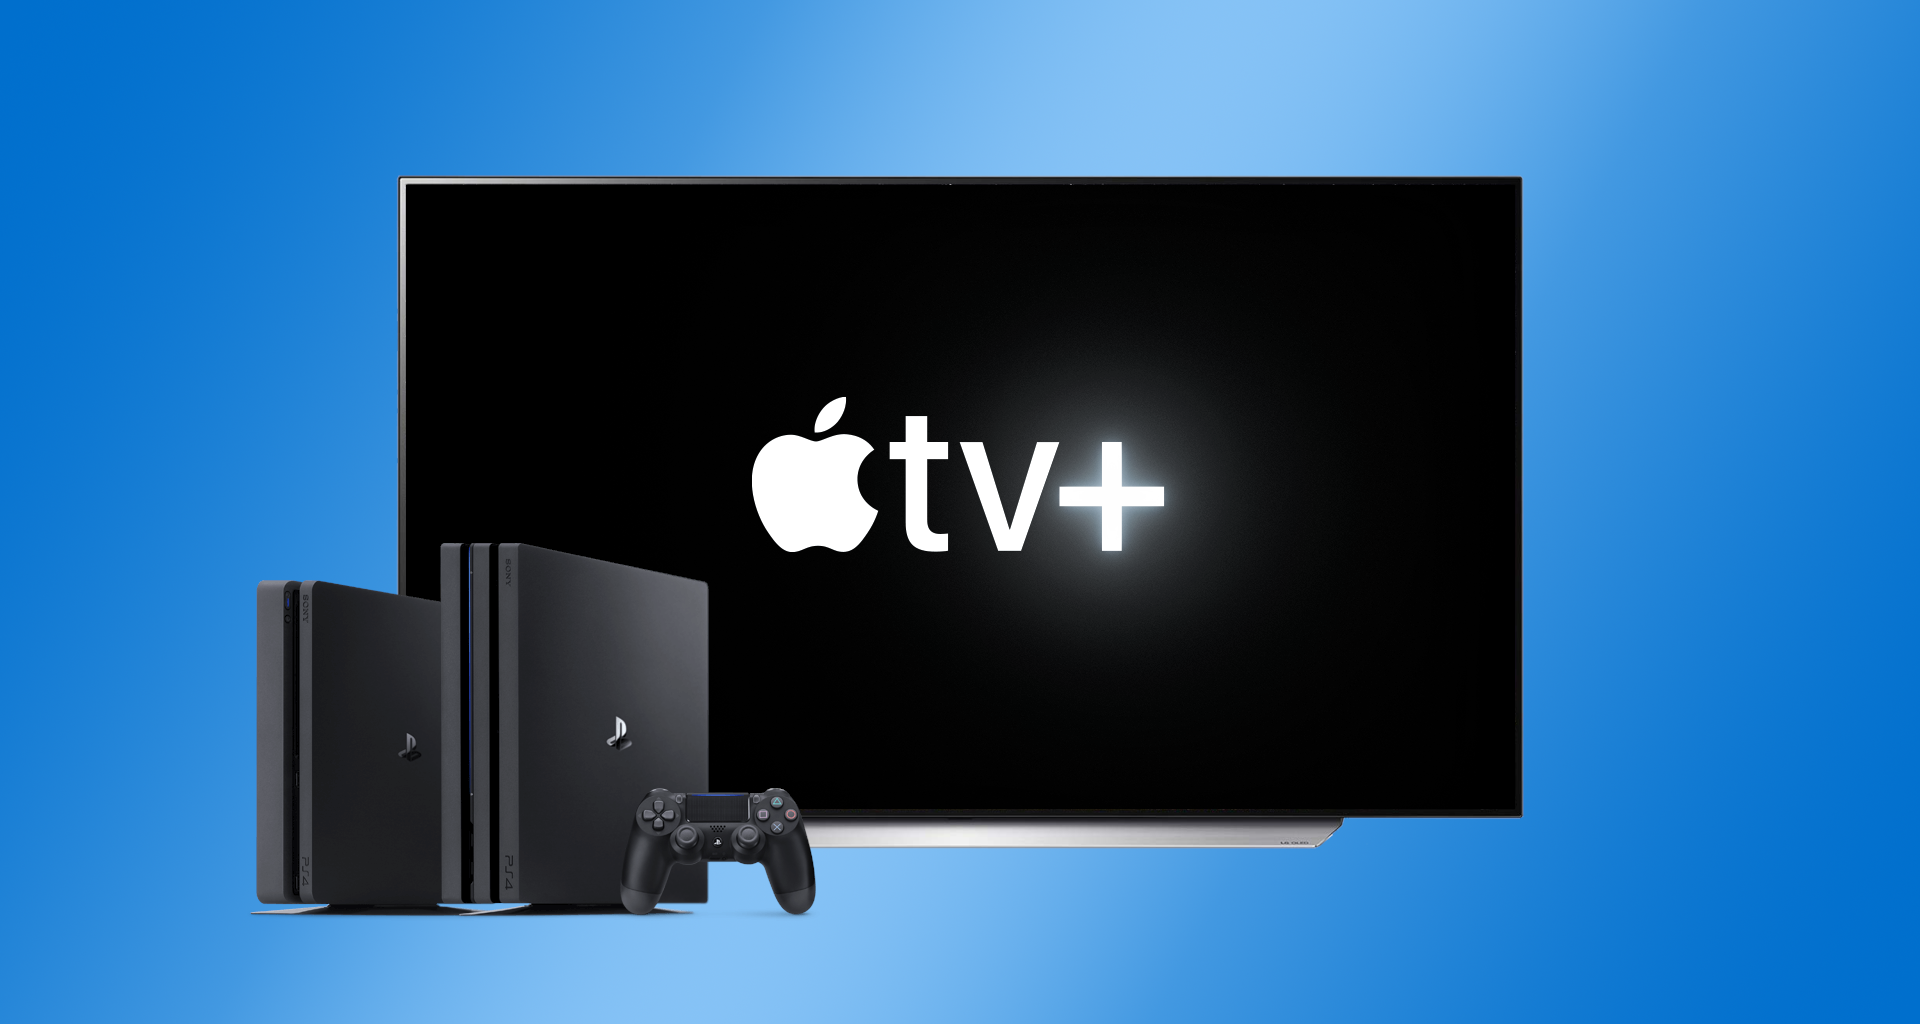 to watch Apple TV+ for free